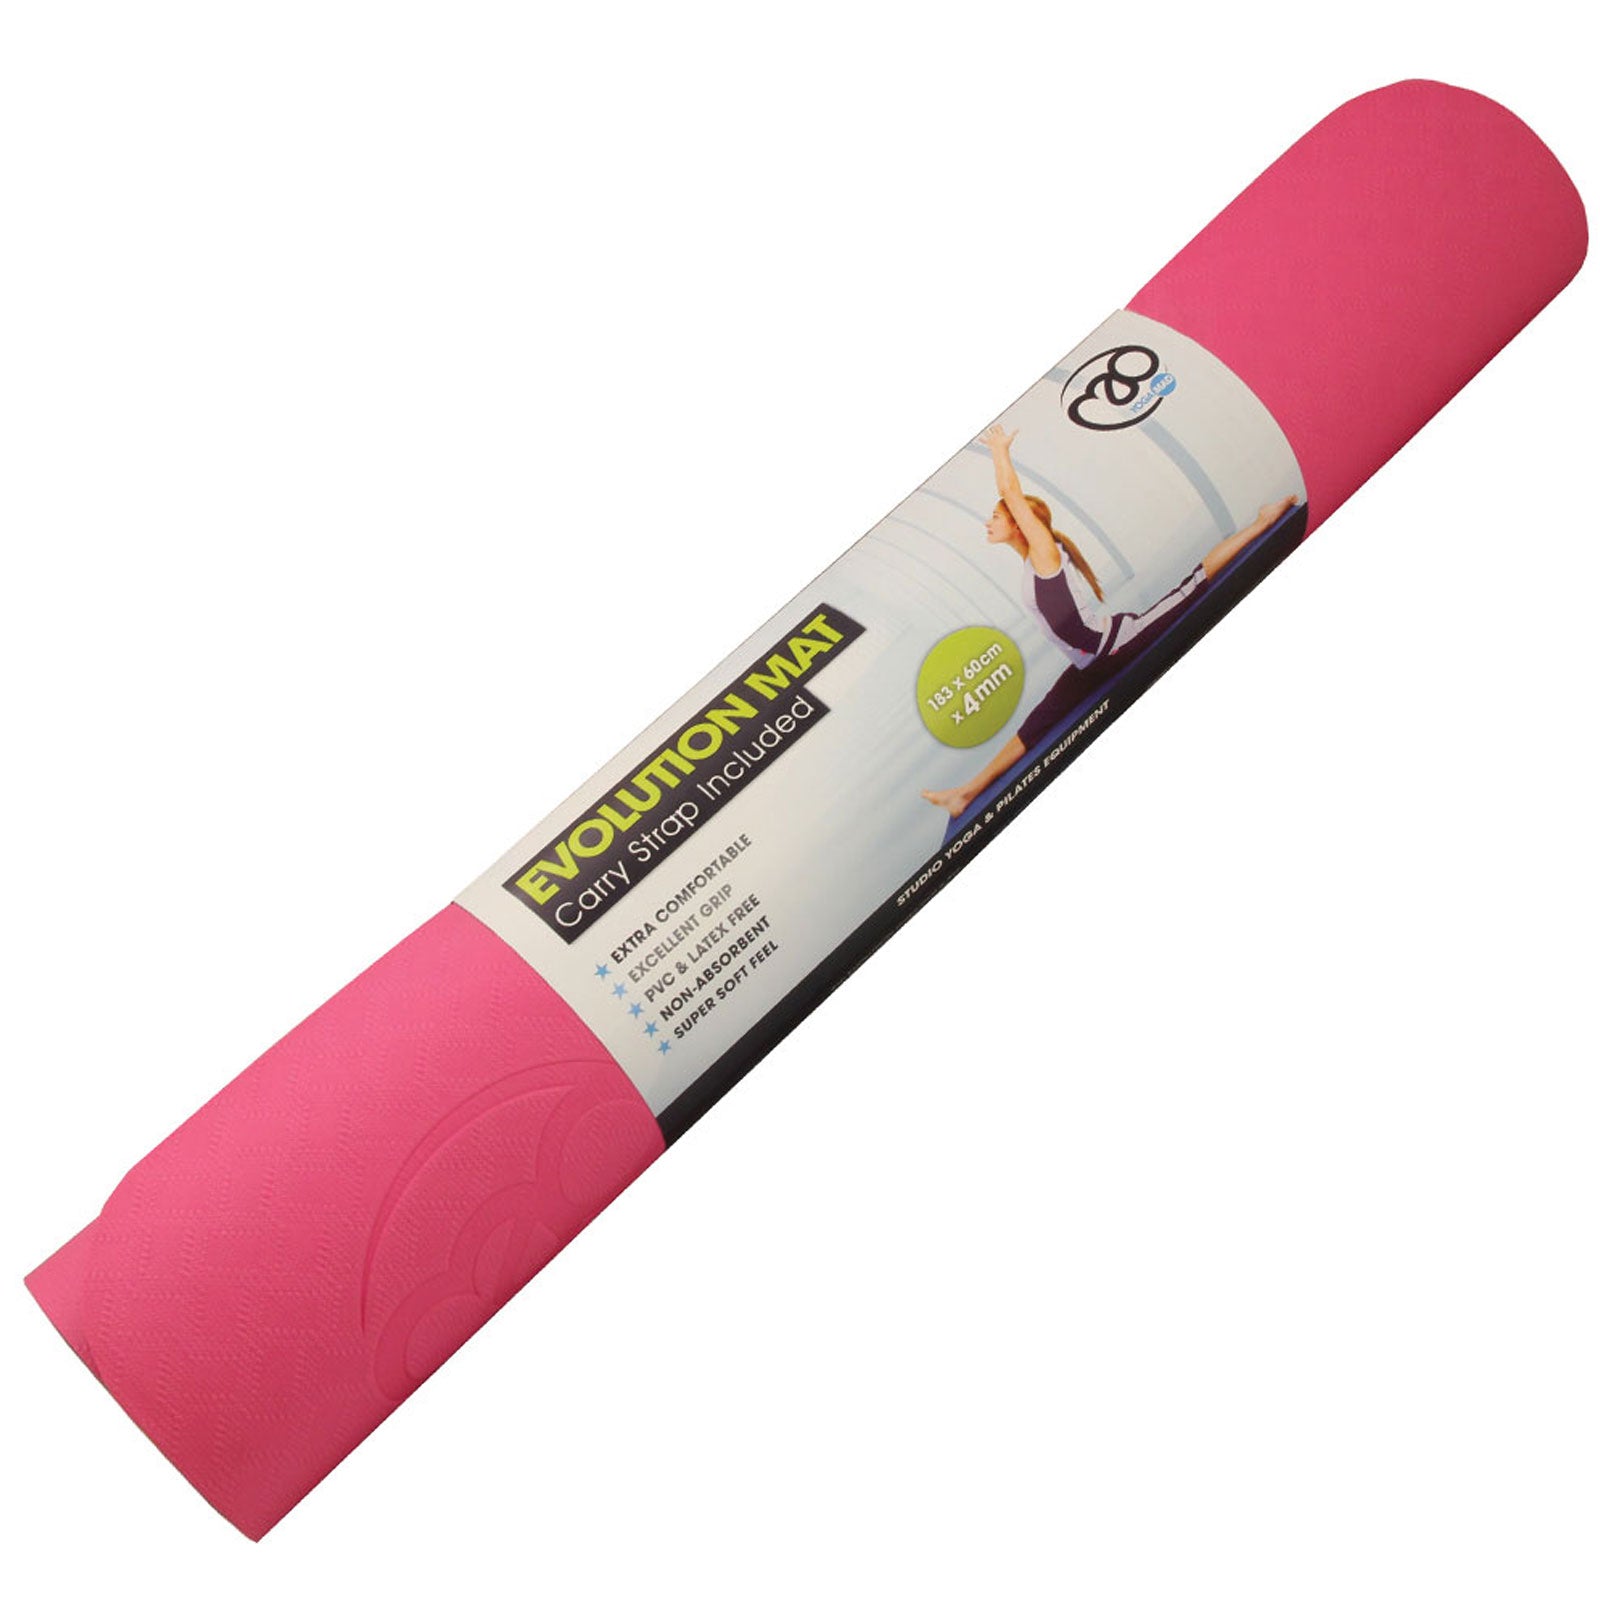 Fitness MAD Evolution 4mm Yoga Mat with Carry String - Pink/Grey Alternate 2